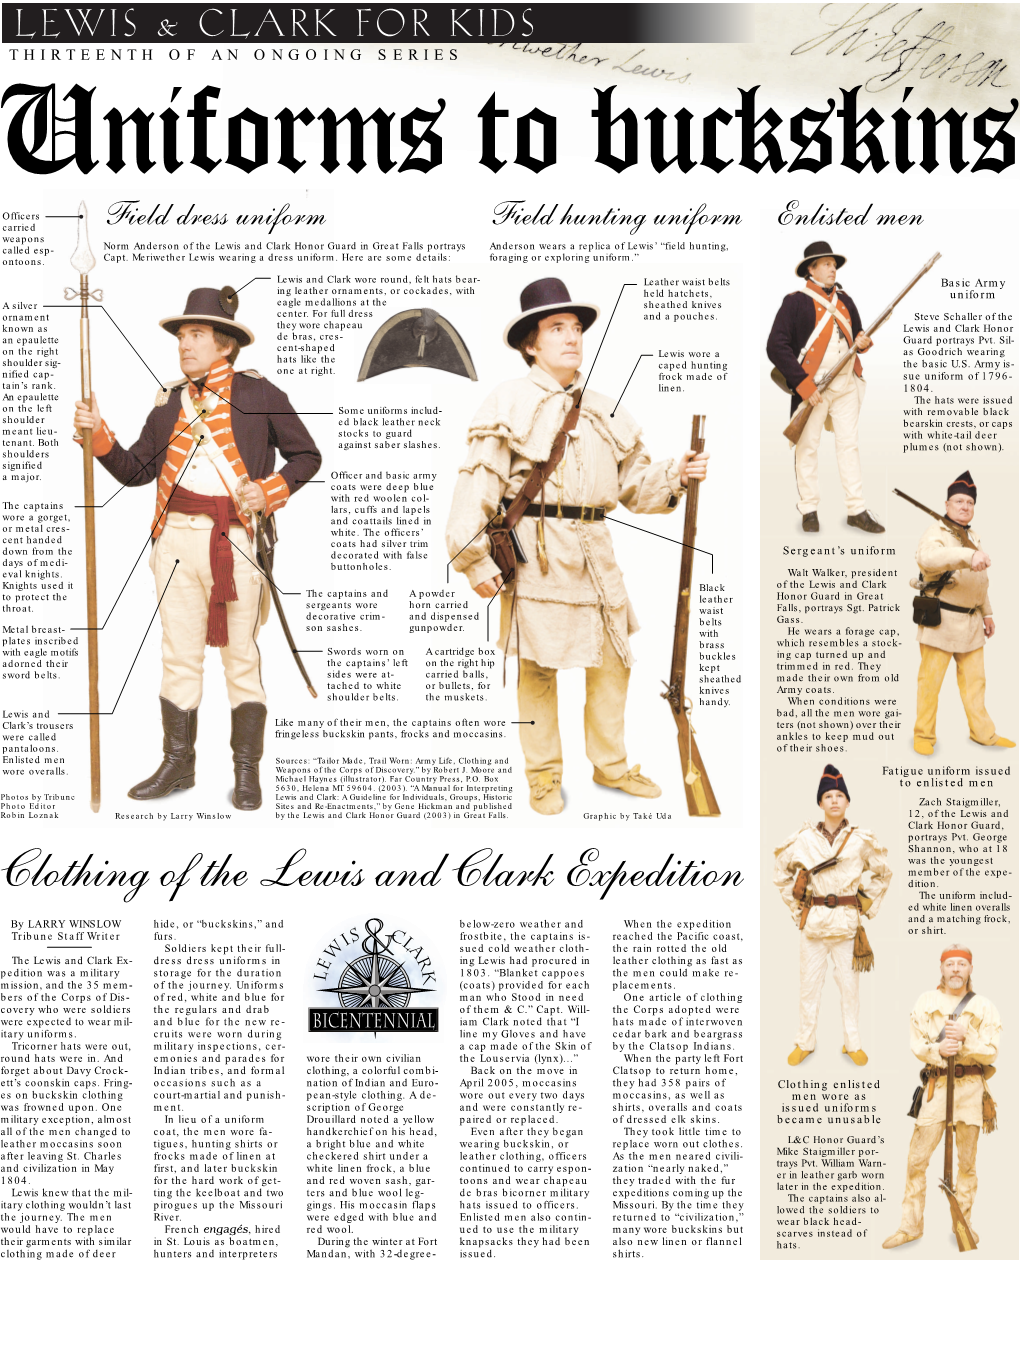 Clothing of the Lewis and Clark Expedition